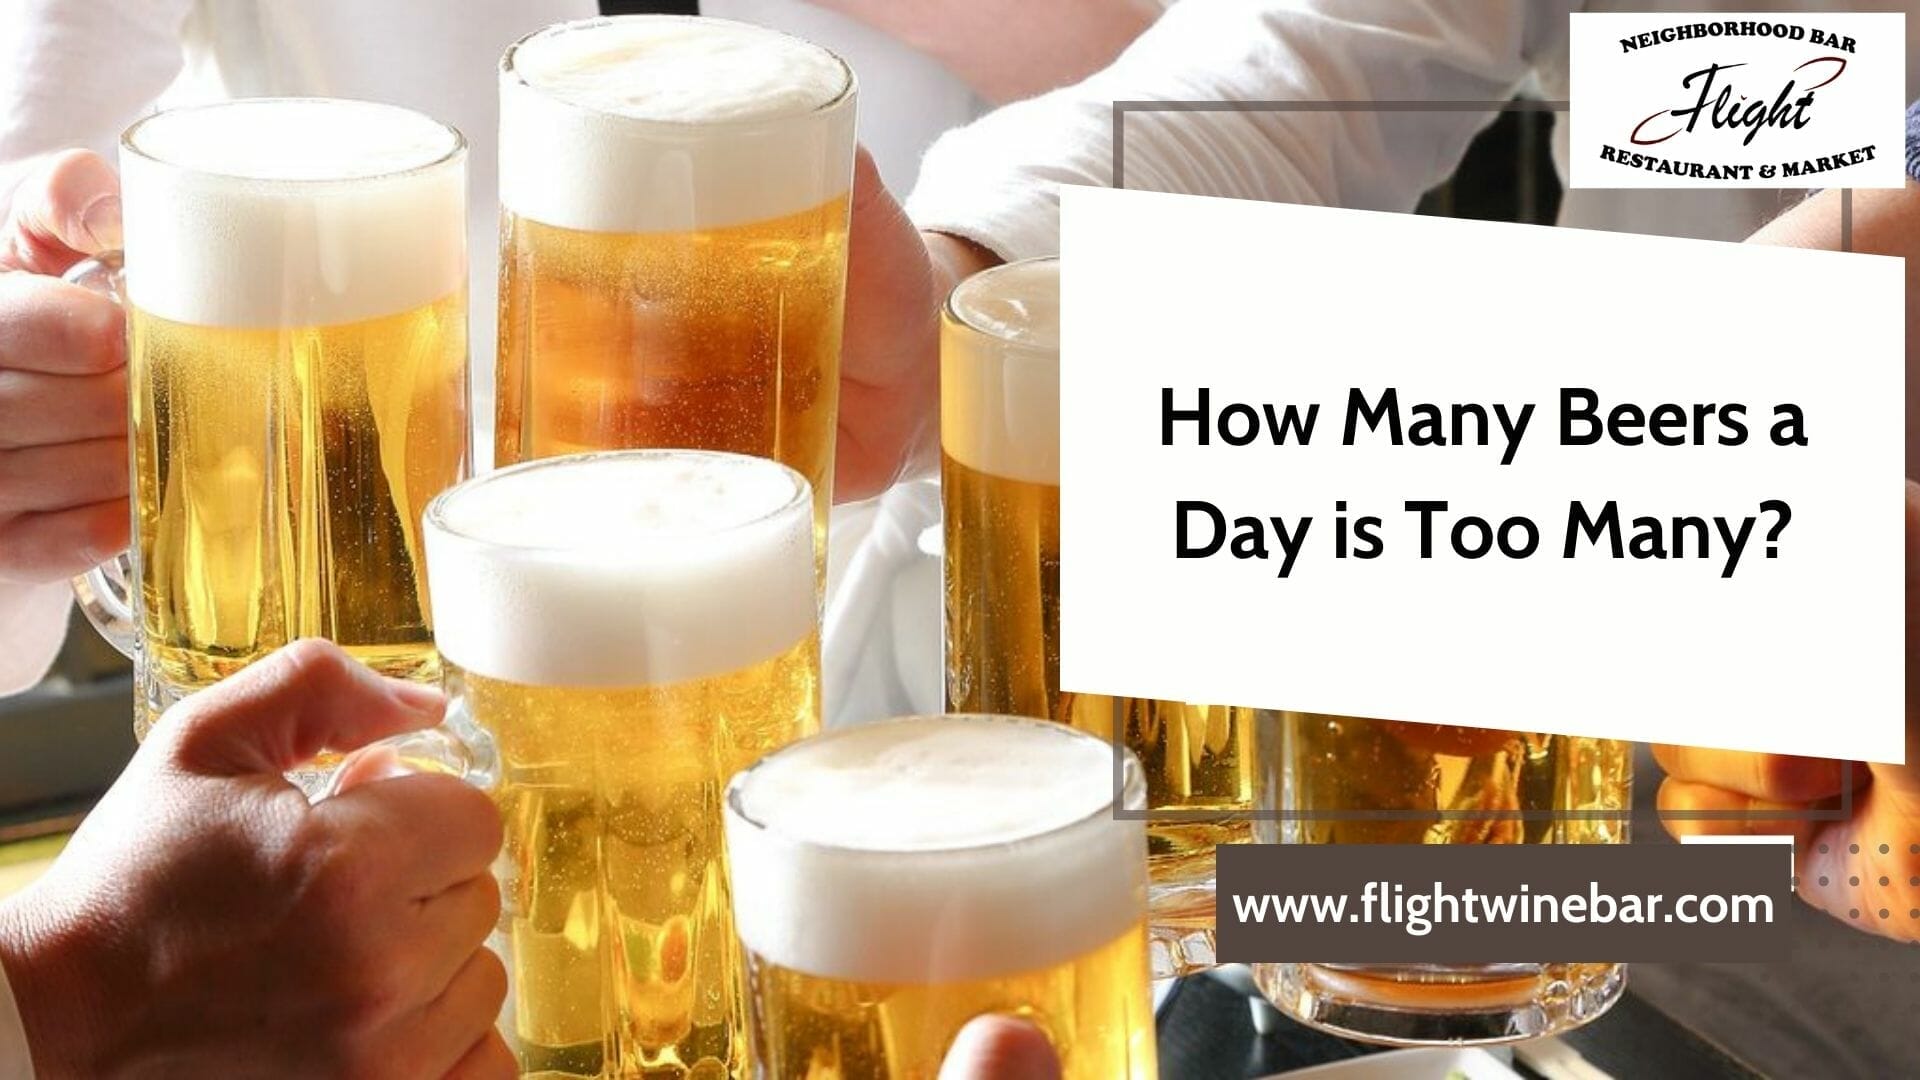 How Many Beers a Day is Too Many